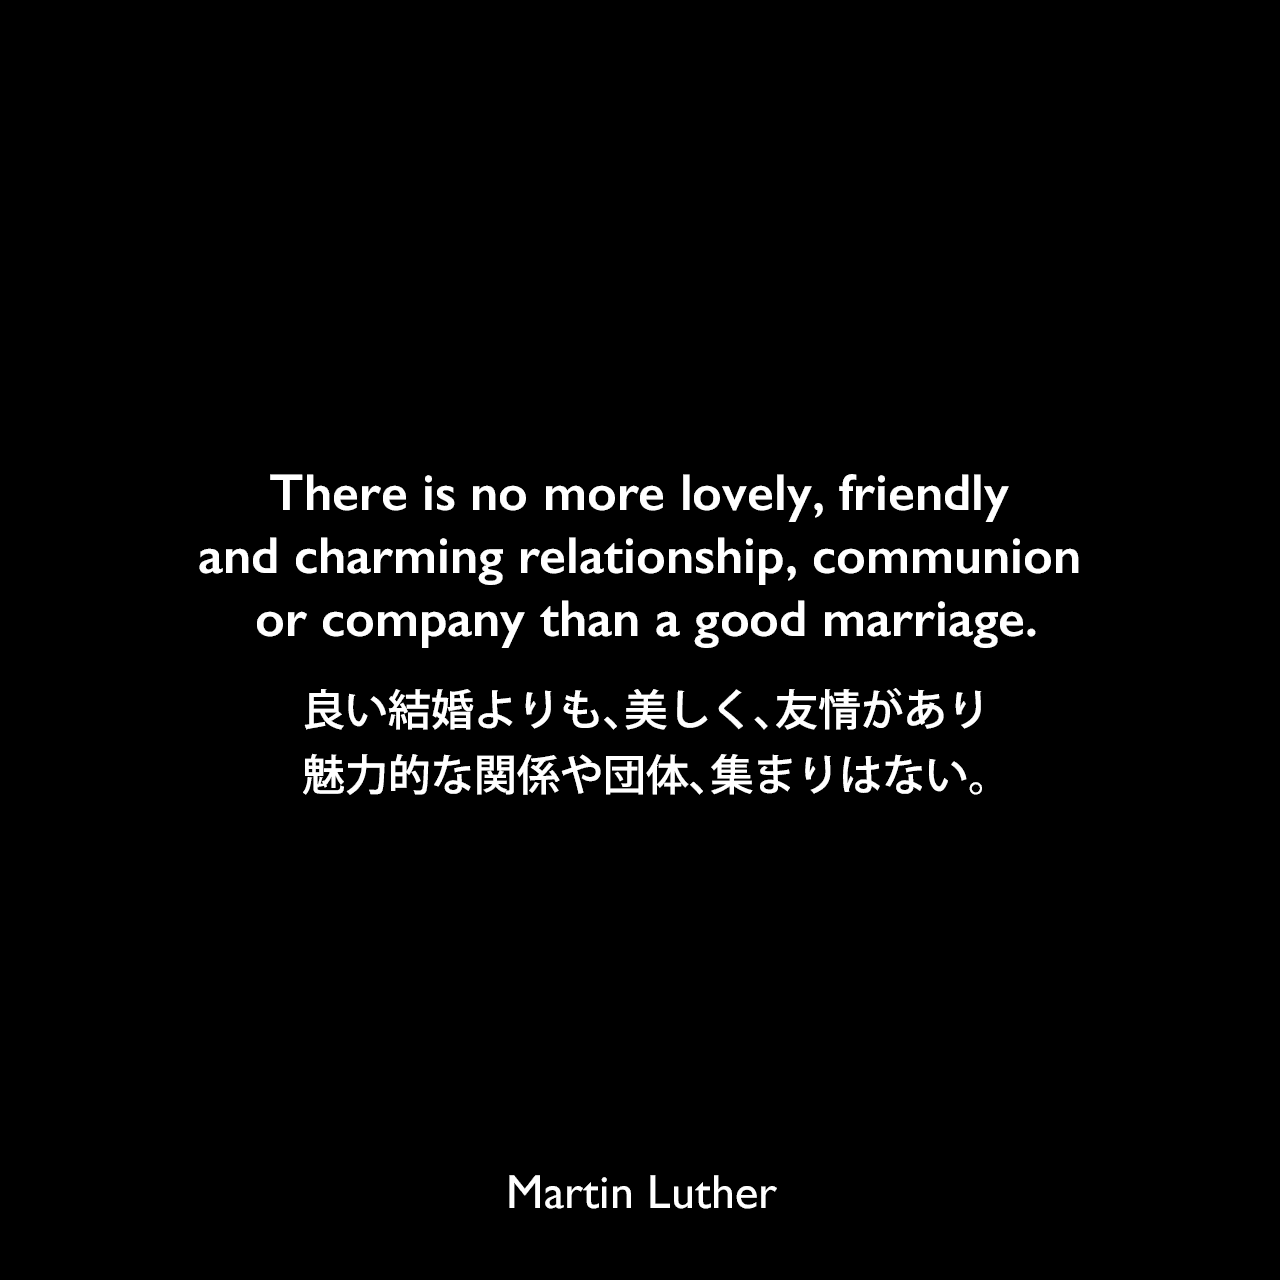 There is no more lovely, friendly and charming relationship, communion or company than a good marriage.良い結婚よりも、美しく、友情があり、魅力的な関係や団体、集まりはない。